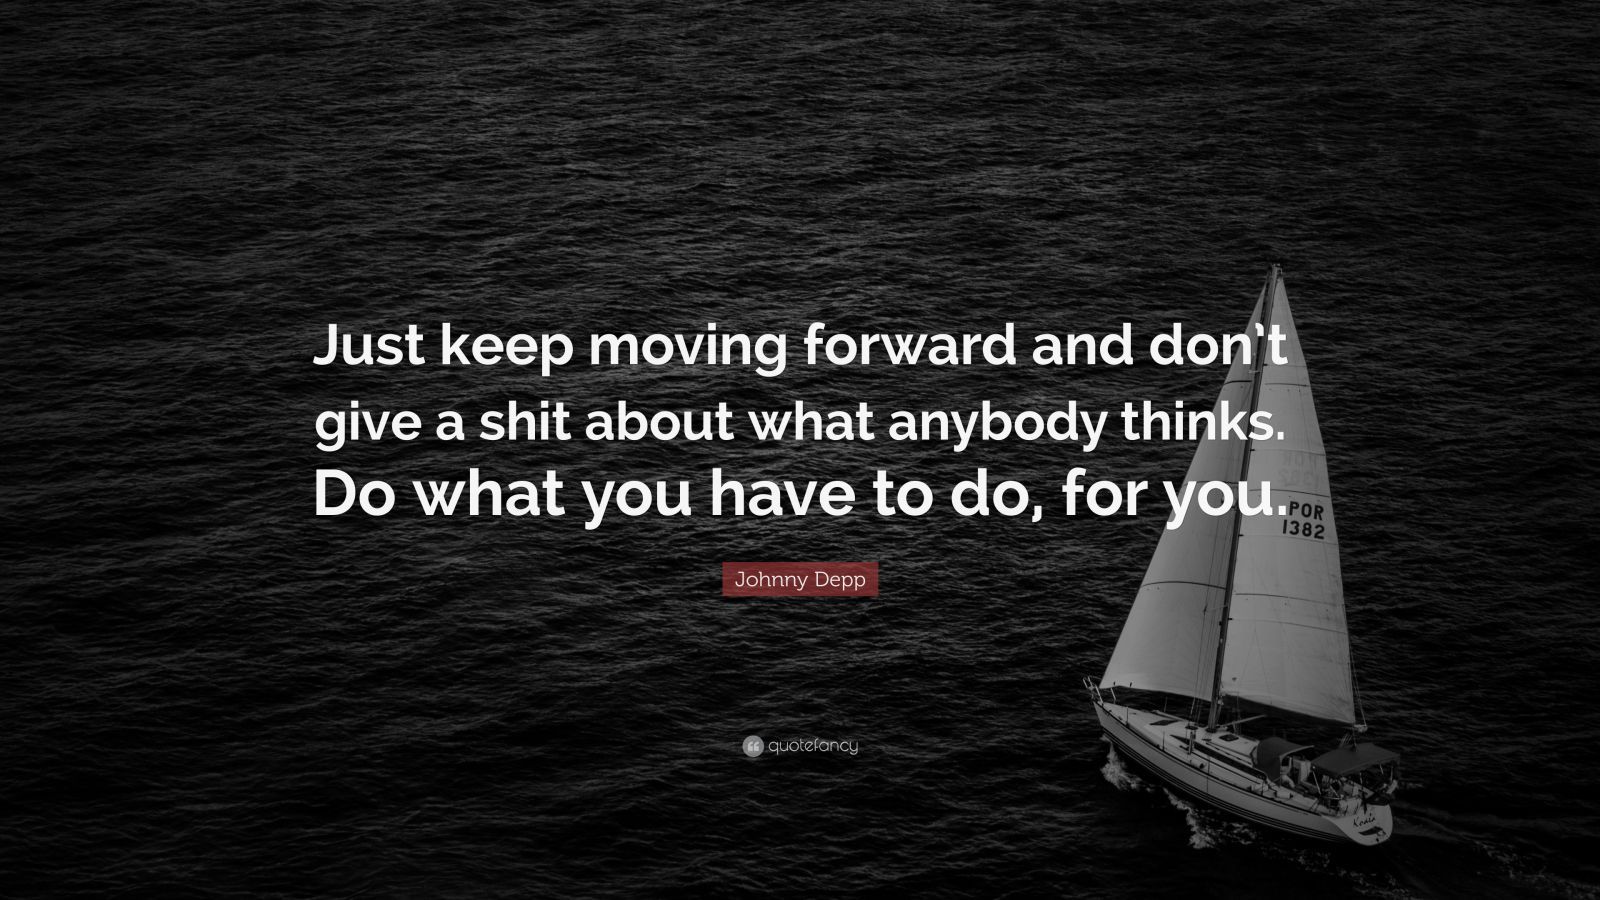 Johnny Depp Quote: “Just keep moving forward and don't give a shit about what anybody thinks. Do what you have to do, for you.” (23 wallpaper)